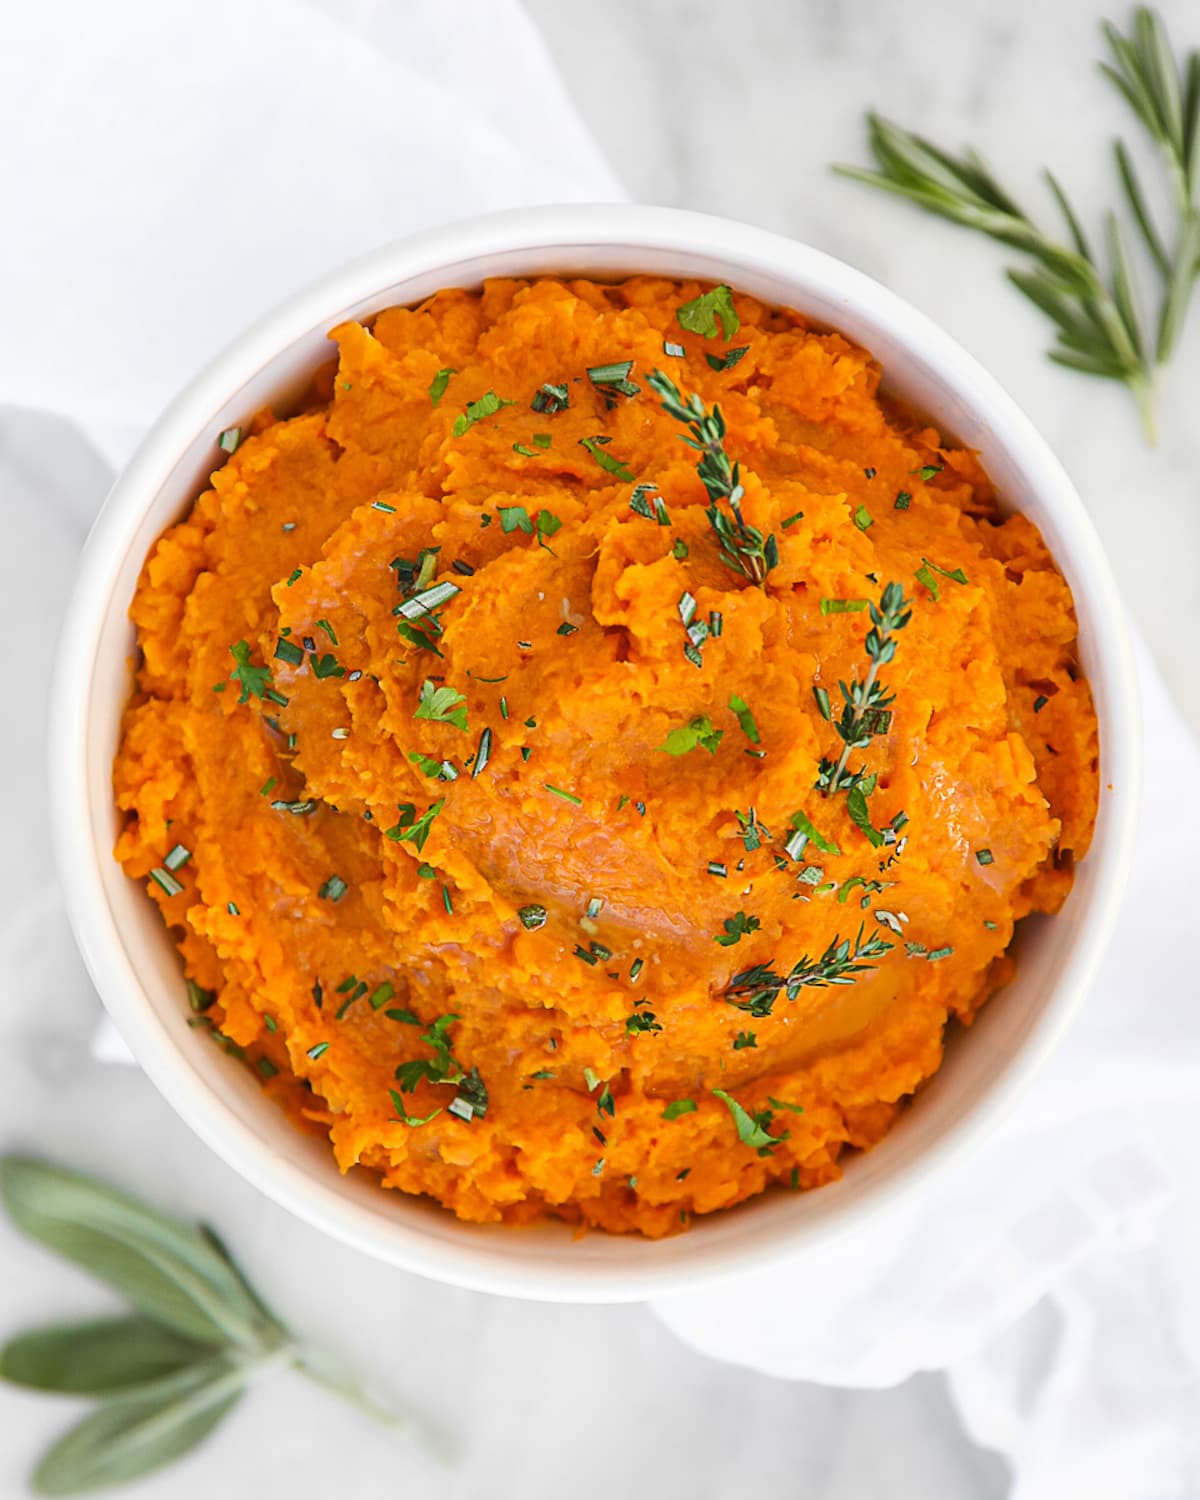 Whipped sweet potatoes in a white bowl